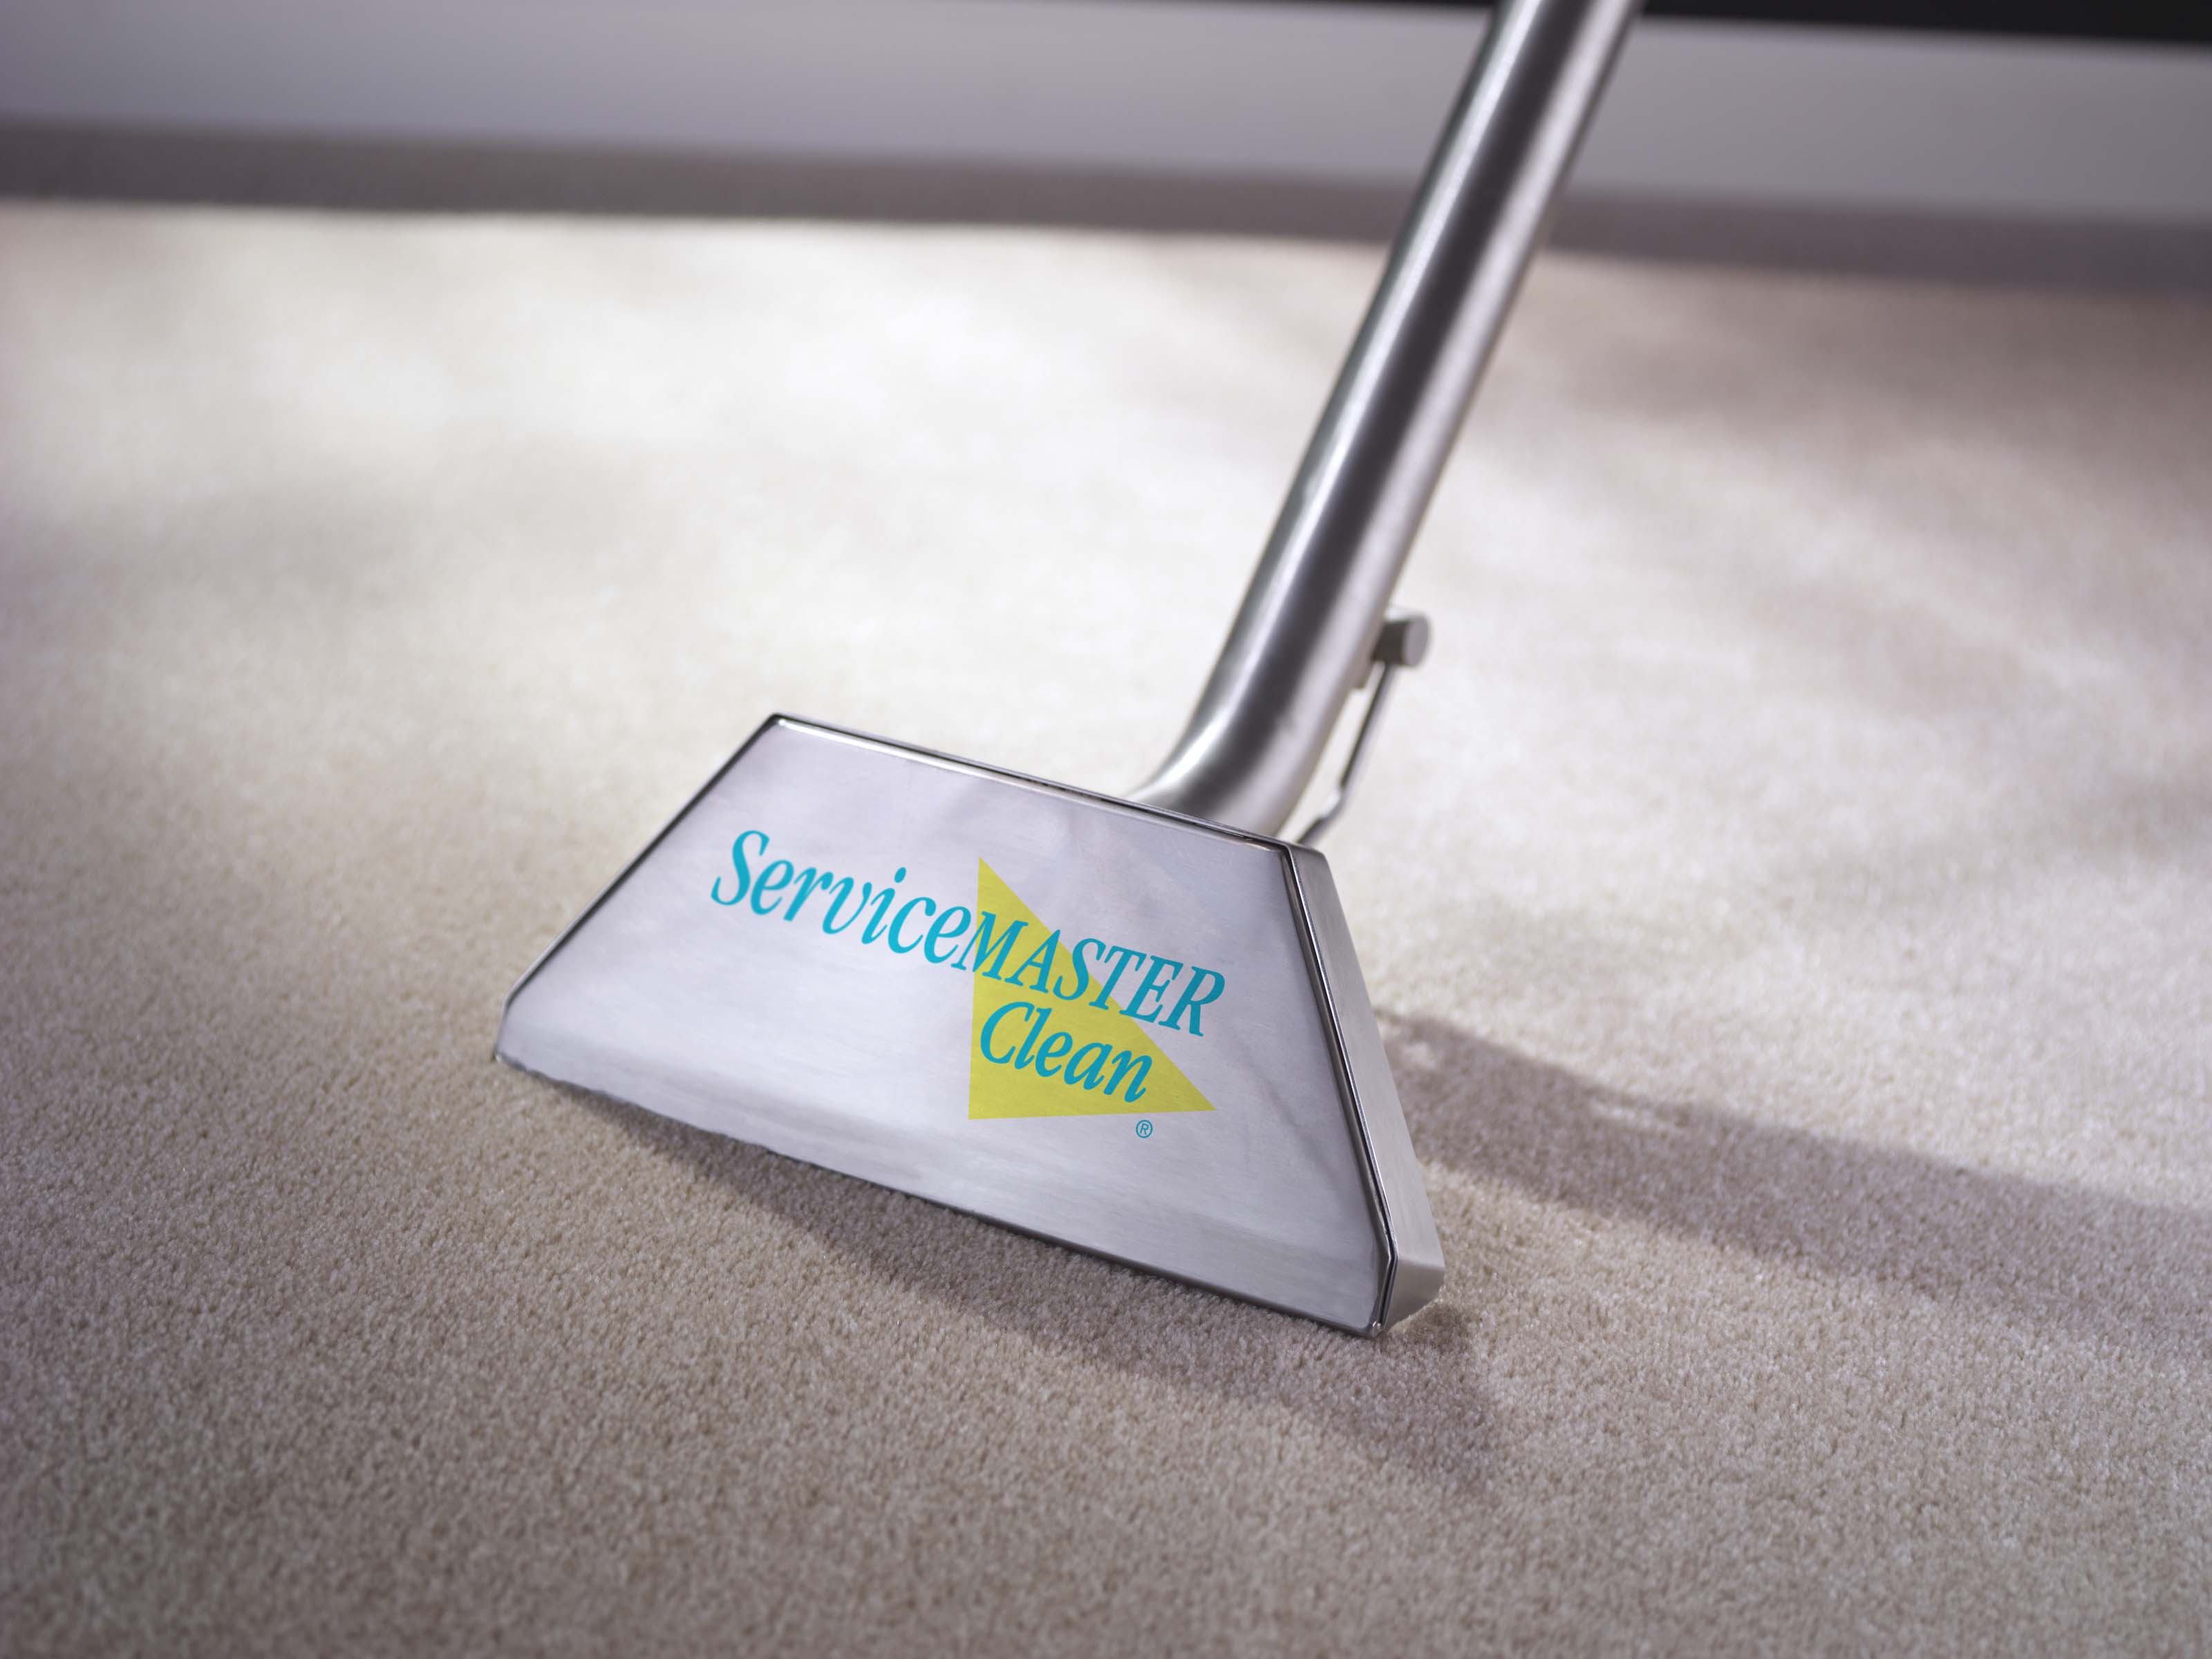 Carpet Cleaning Service Master Steamboat Springs